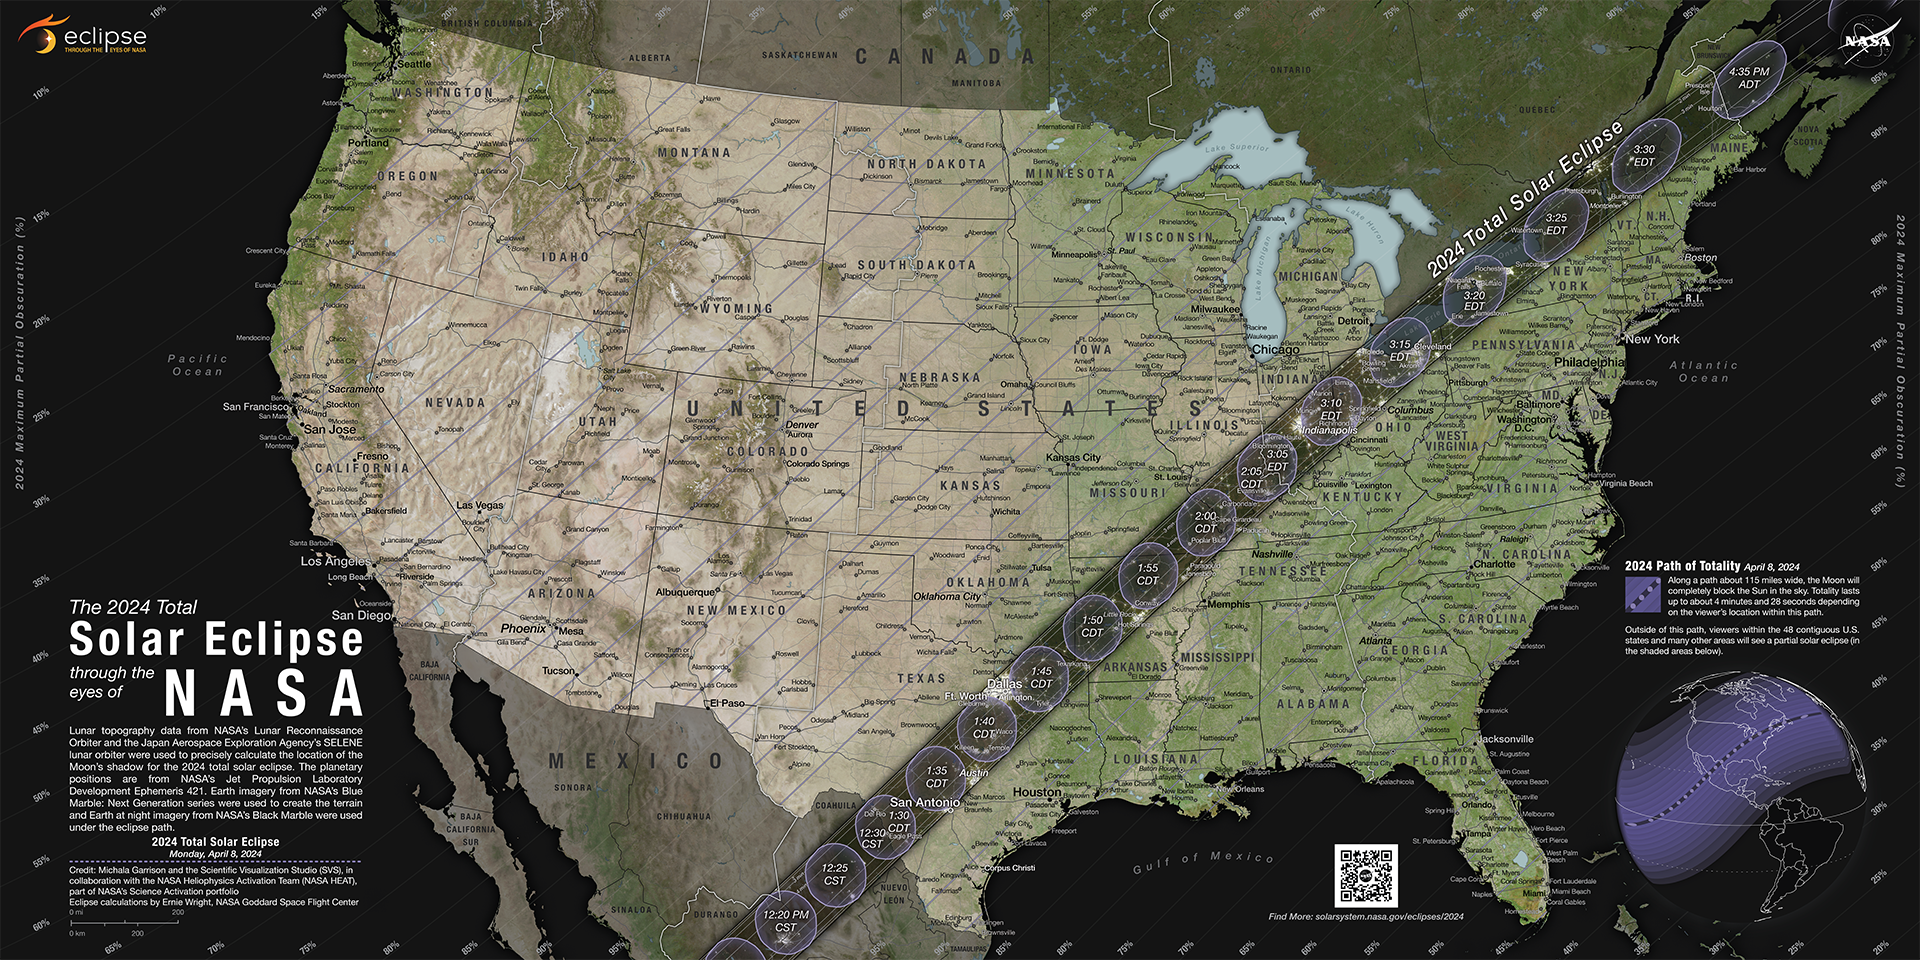 A map of the contiguous U.S. shows the path of the 2024 total solar eclipse stretching on a narrow band from Texas to Maine